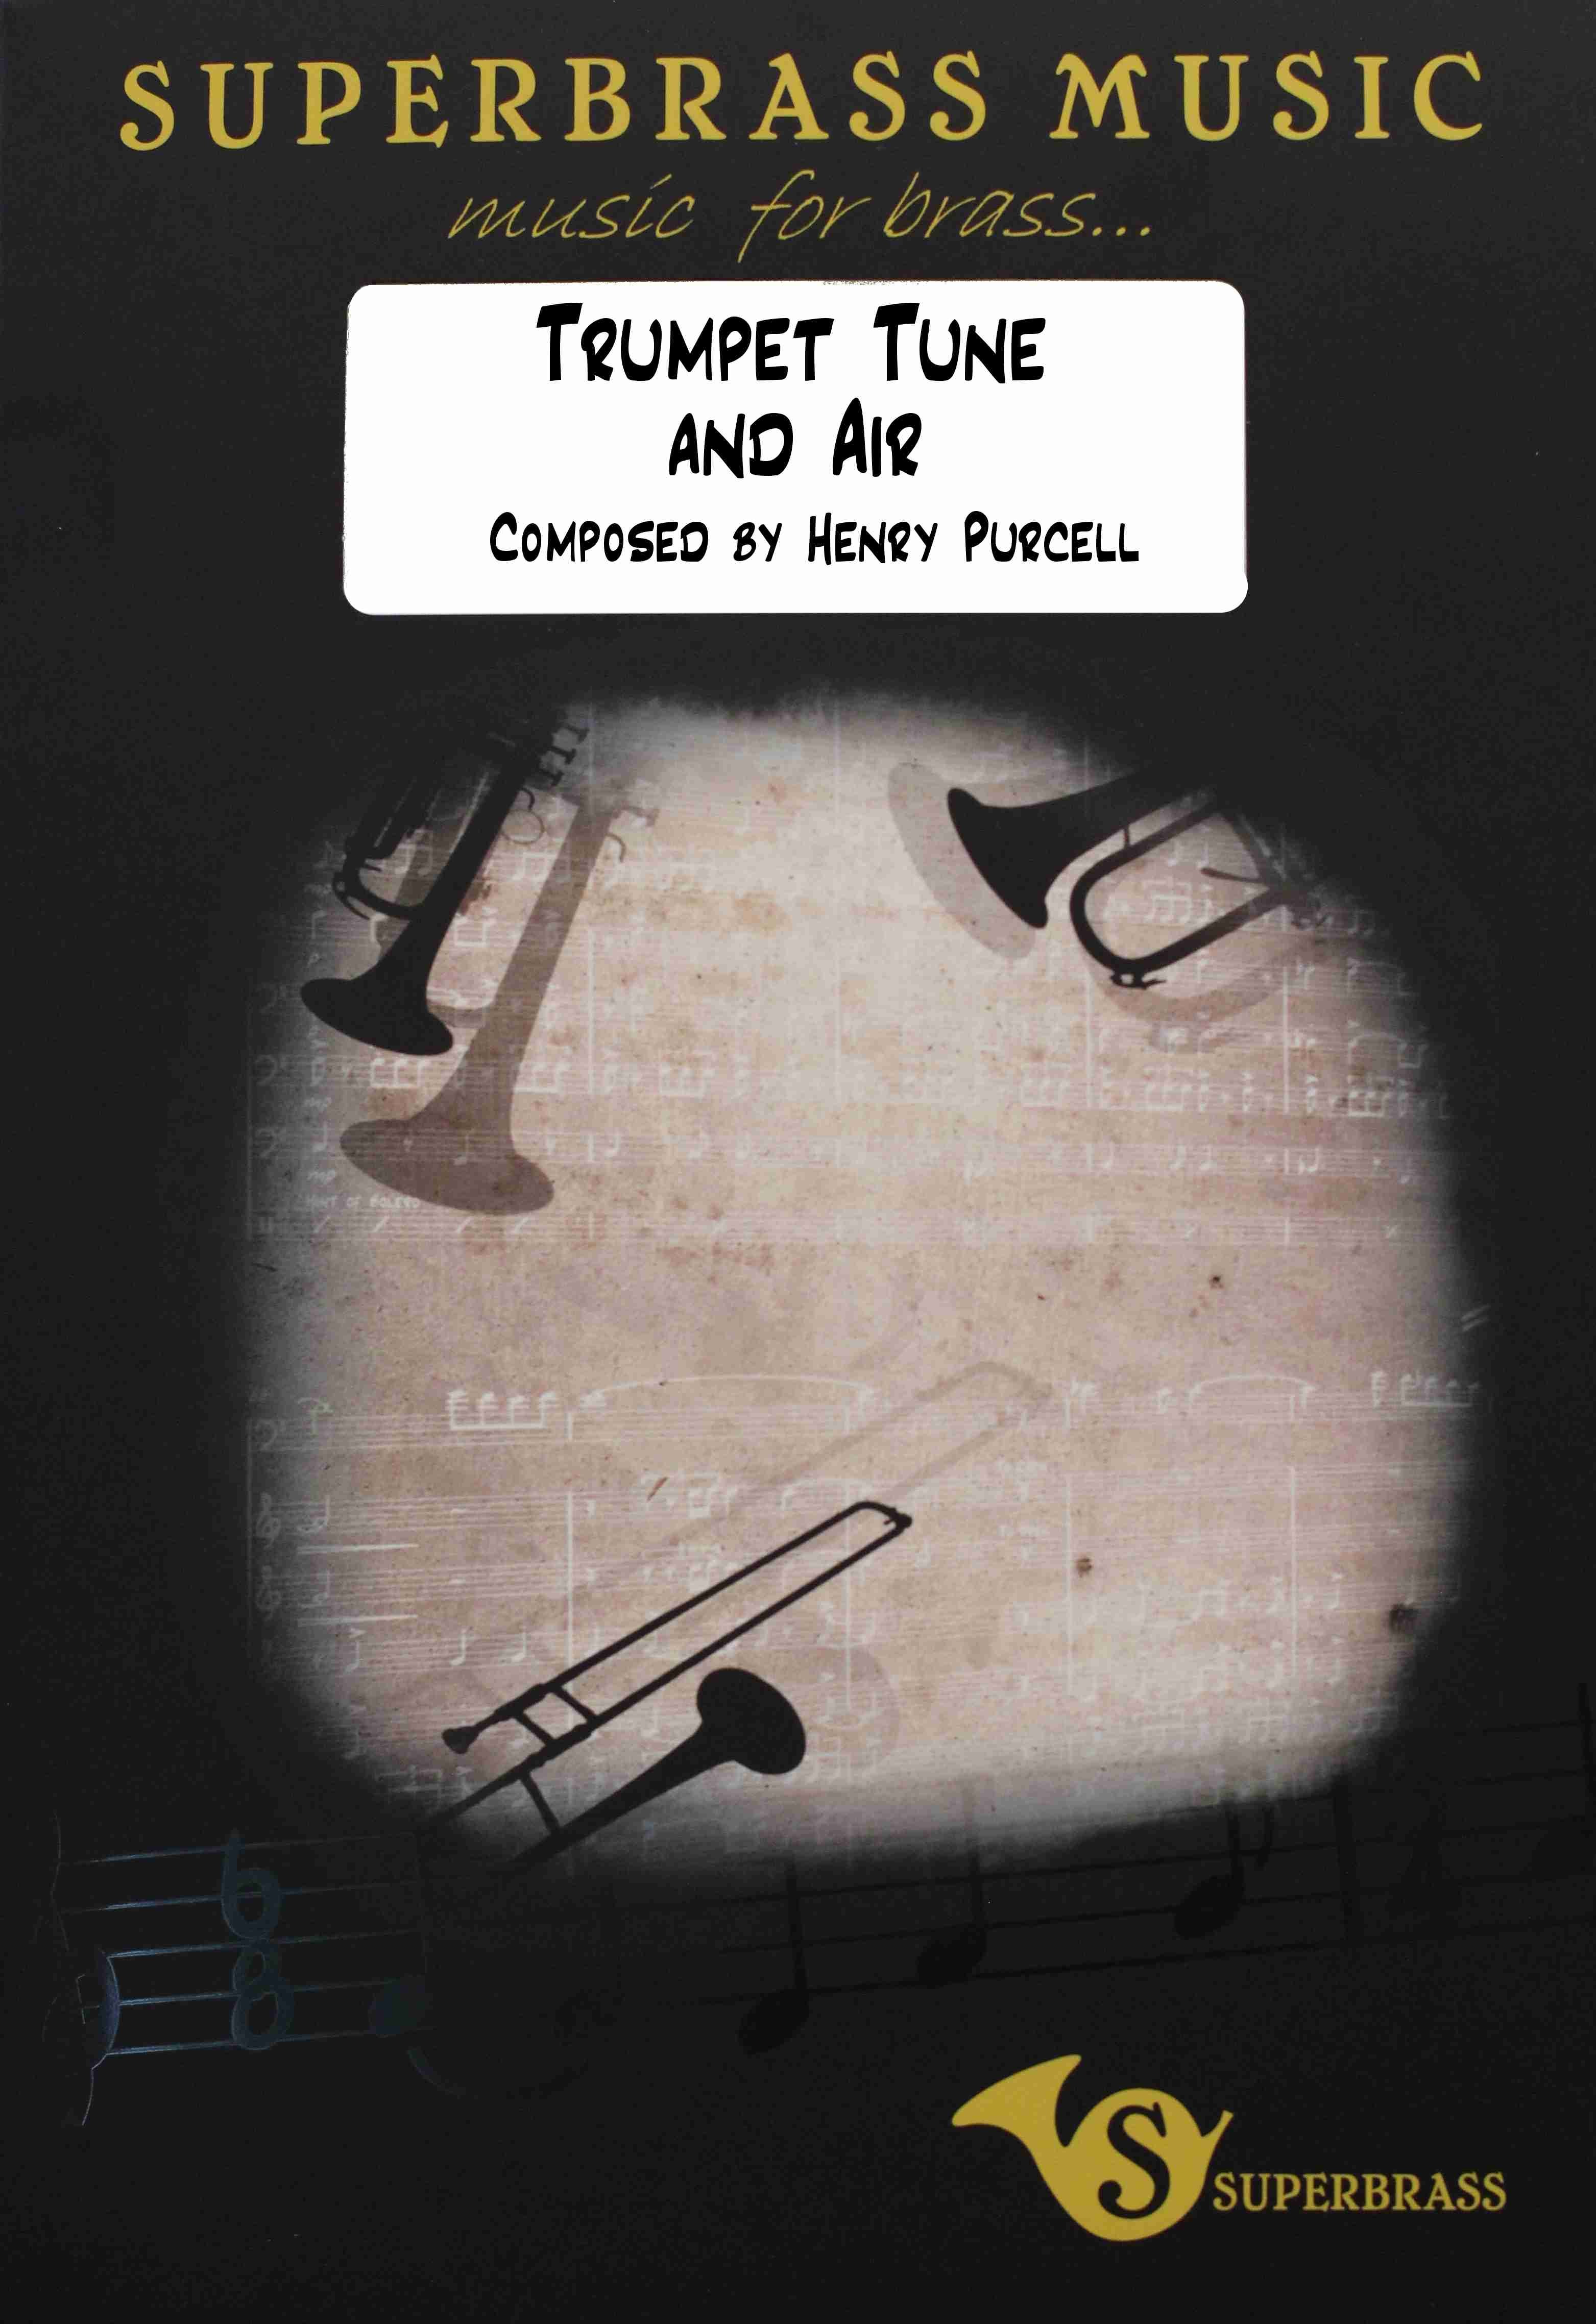 TRUMPET TUNE AND AIR - Parts & Score, SUPERBRASS 10 Part